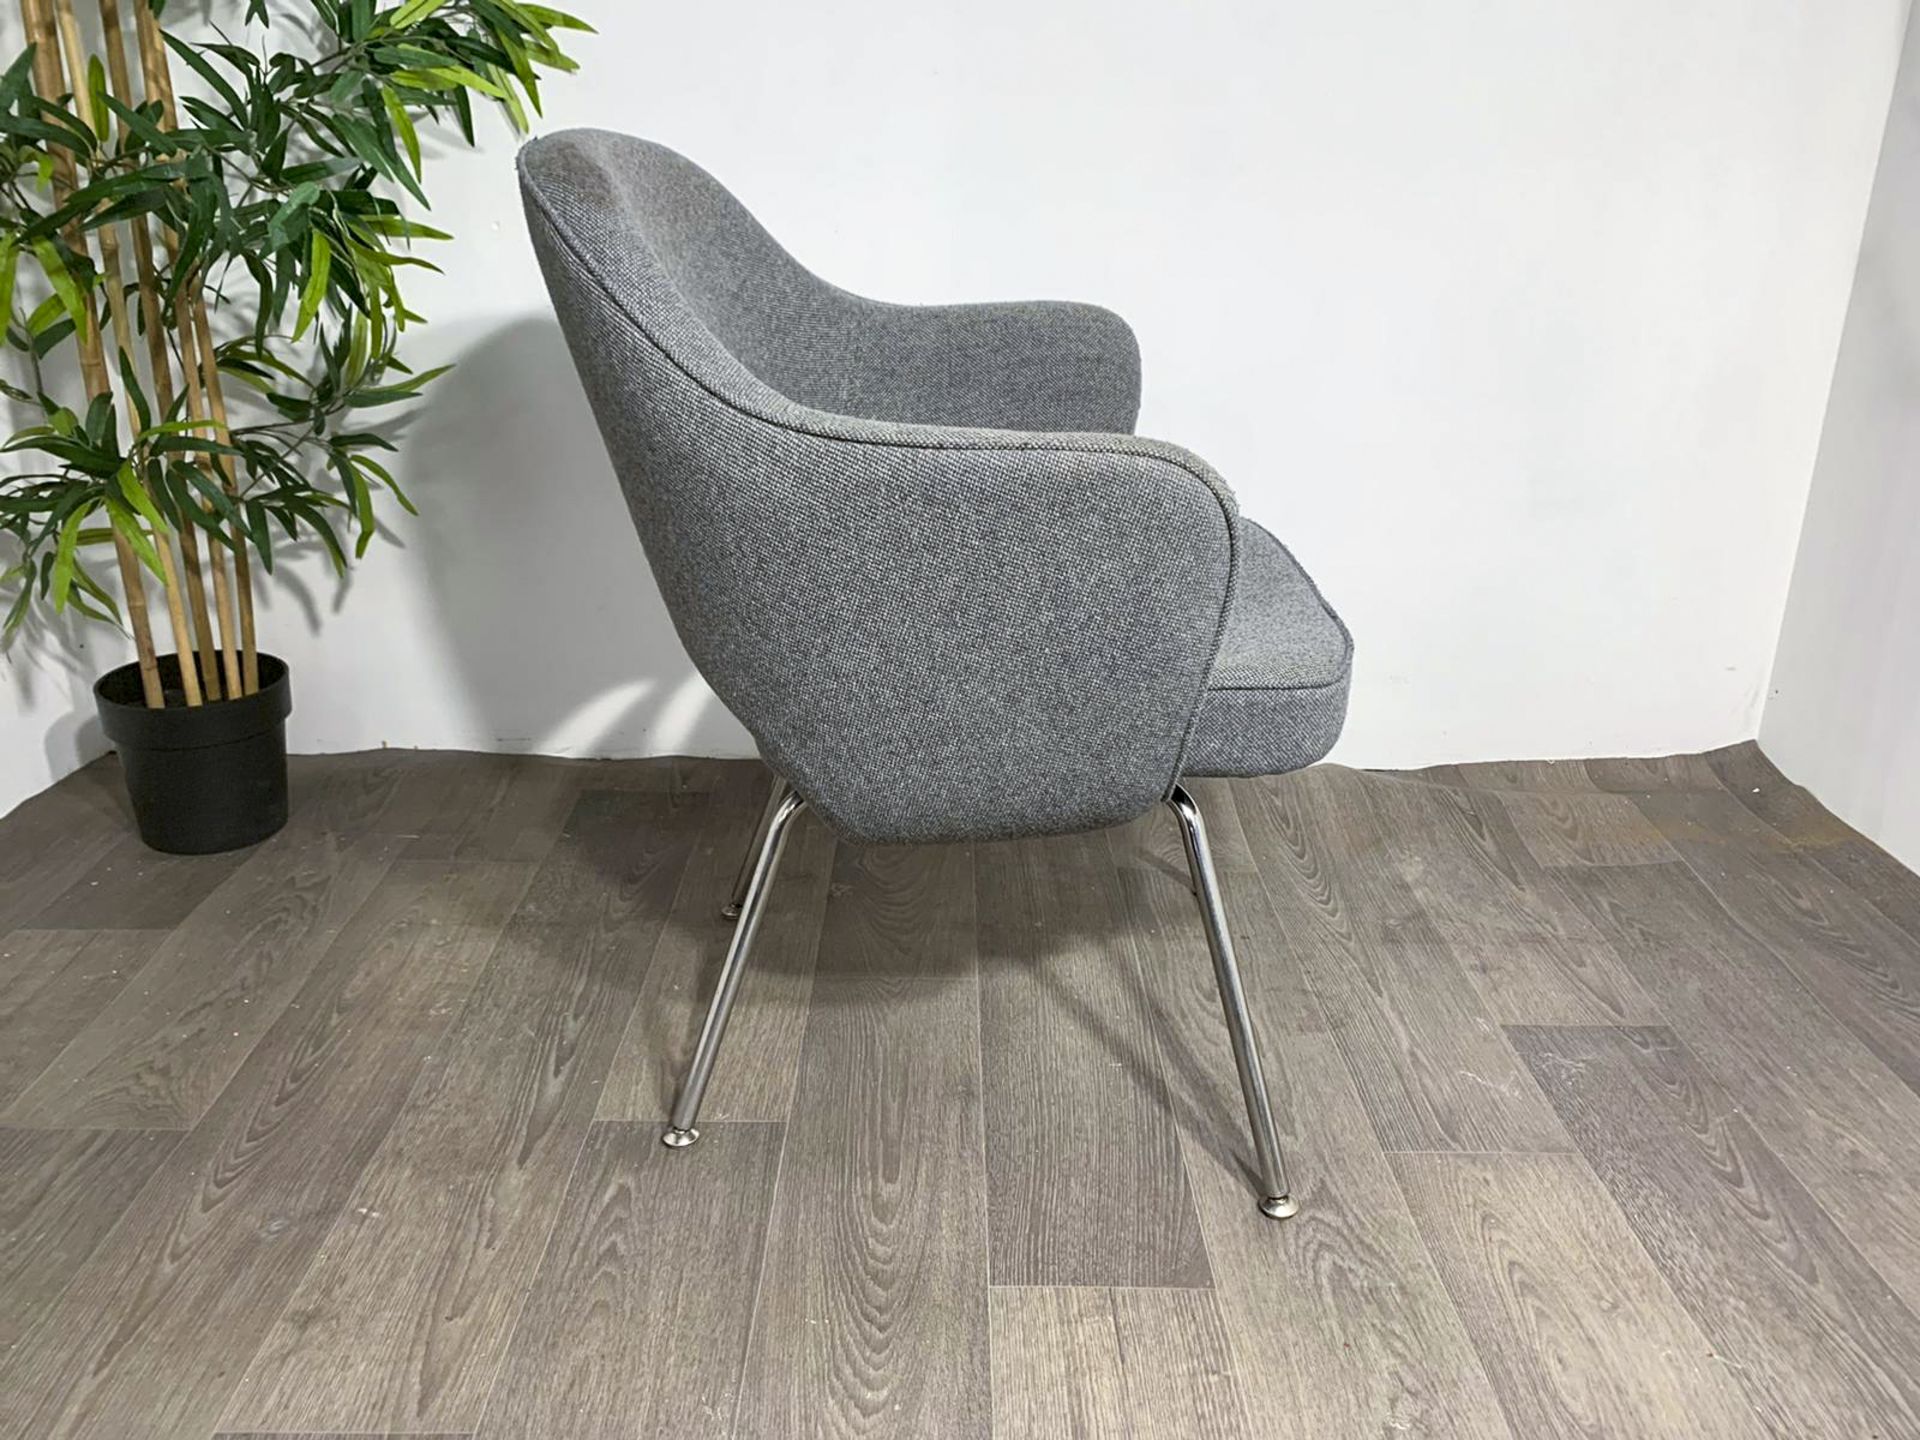 Grey Fabric Commercial Grade Chair with Chrome Legs x2 - Image 4 of 9